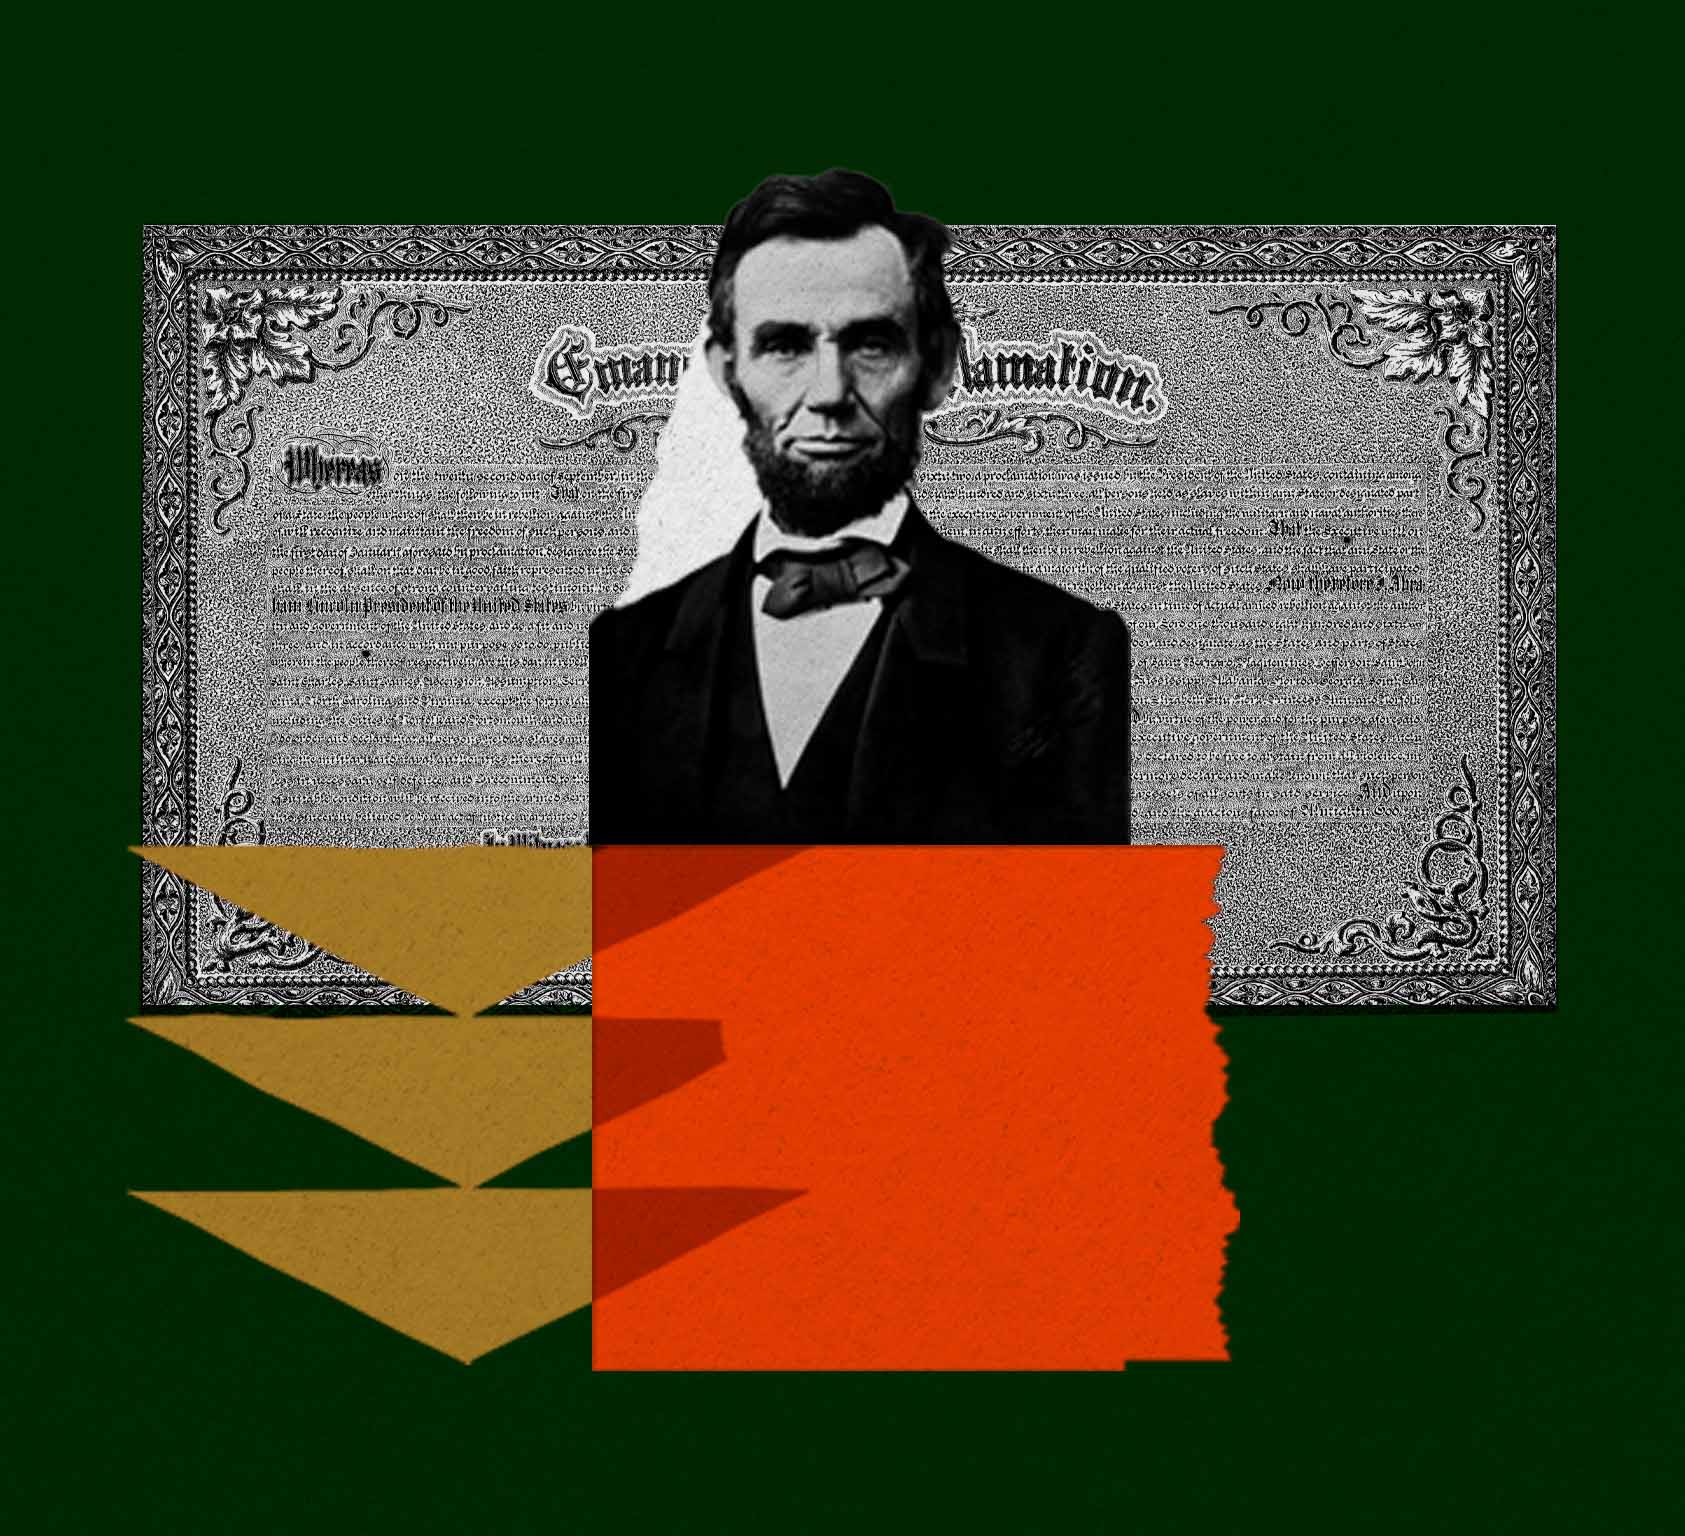 Cutout portrait Abraham Lincoln over a proclamation on a vibrant background.